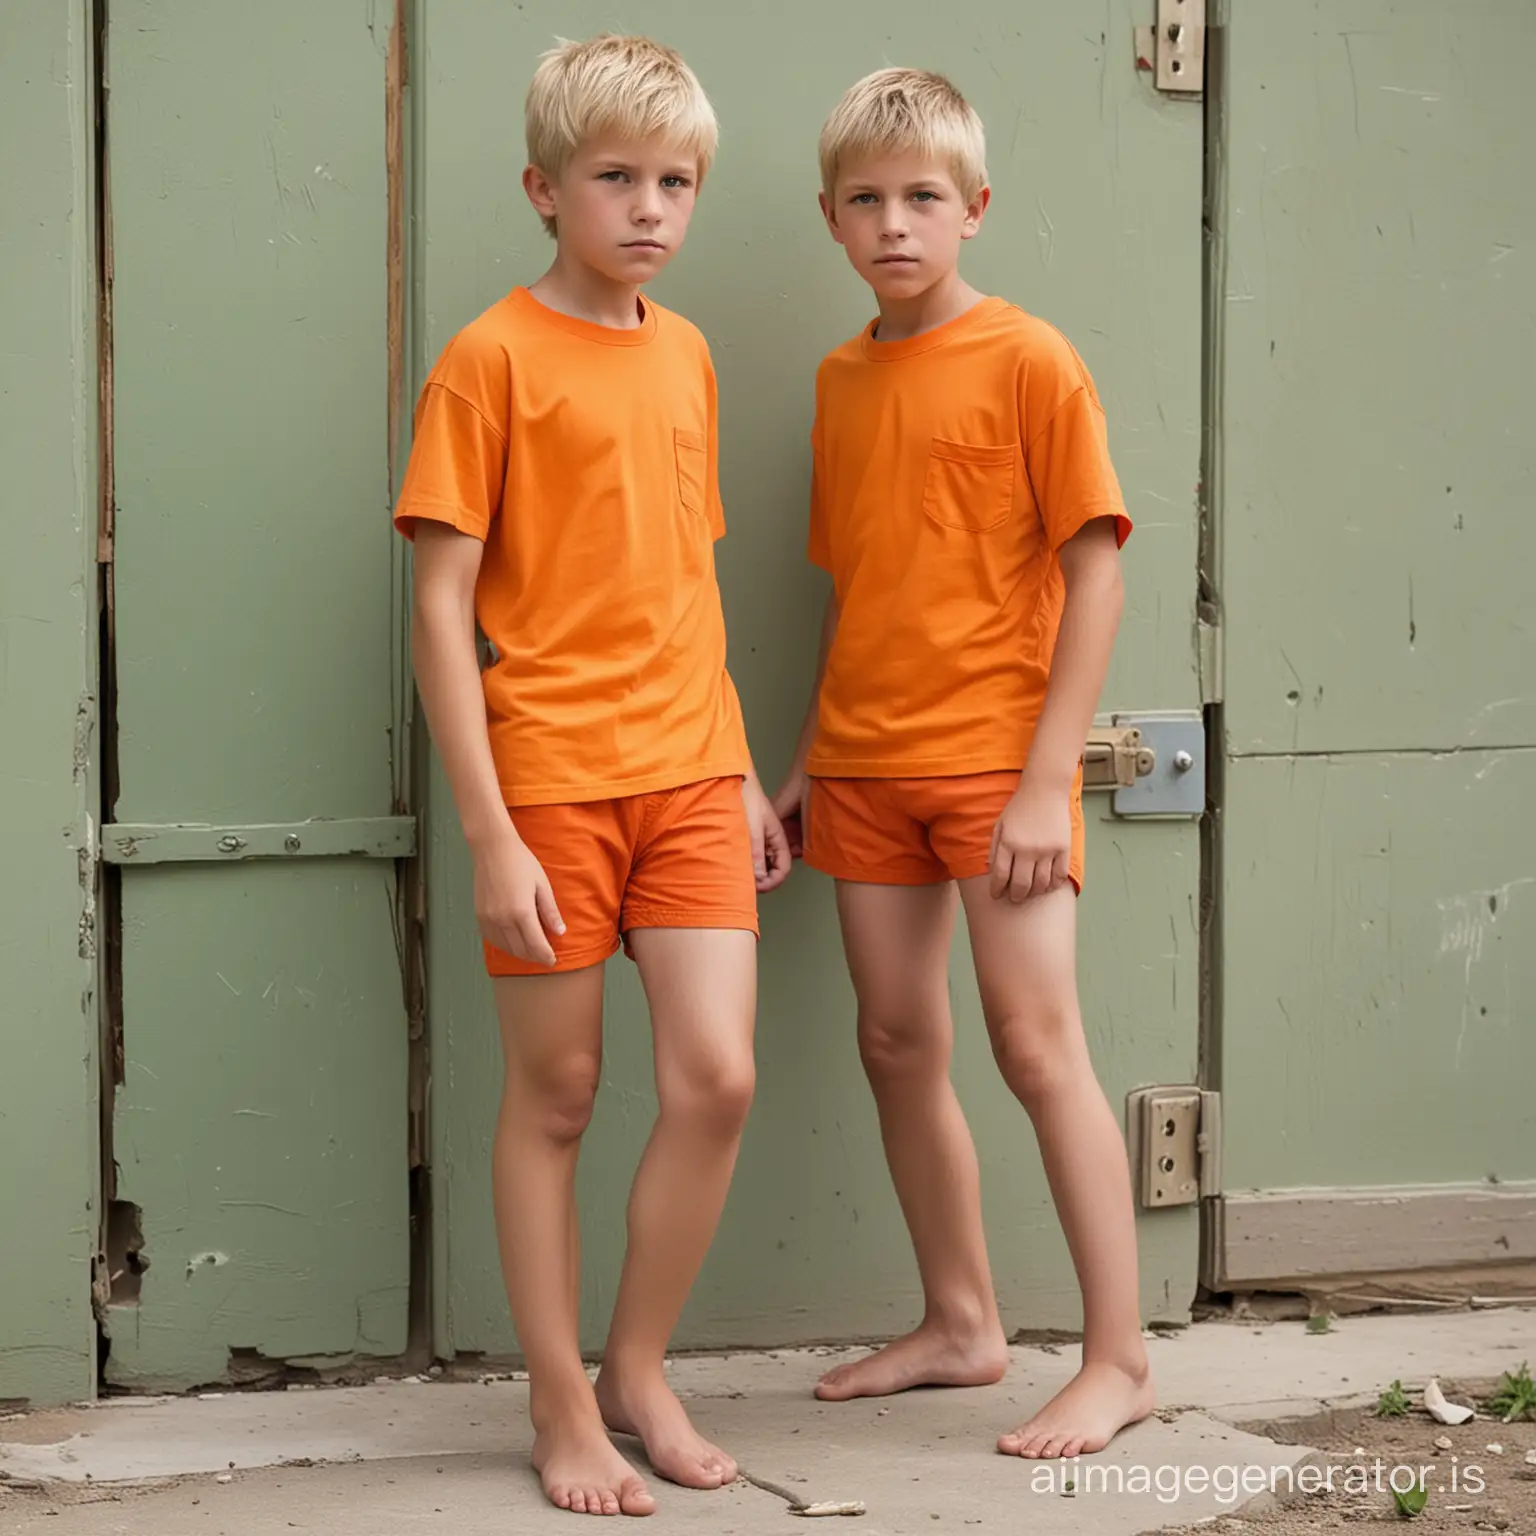 Blondhaired-Boys-in-Orange-Outfits-Barefoot-in-Juvenile-Prison